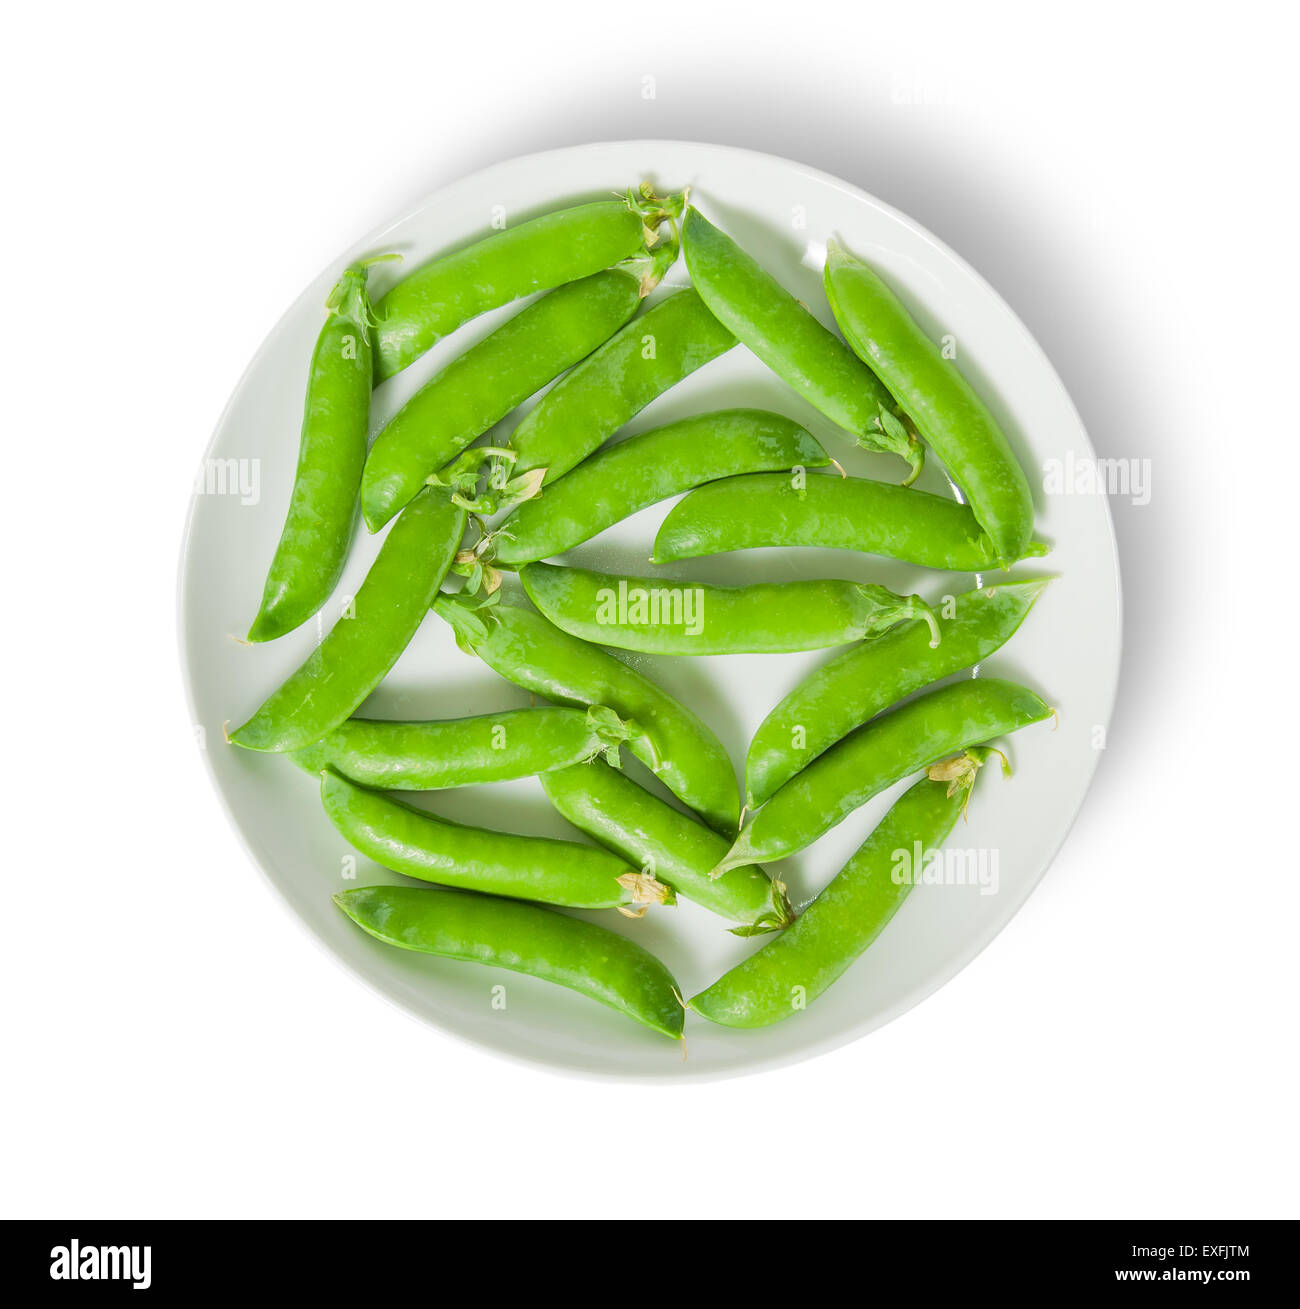 Several pods of peas on a white plate top view isolated on white background Stock Photo